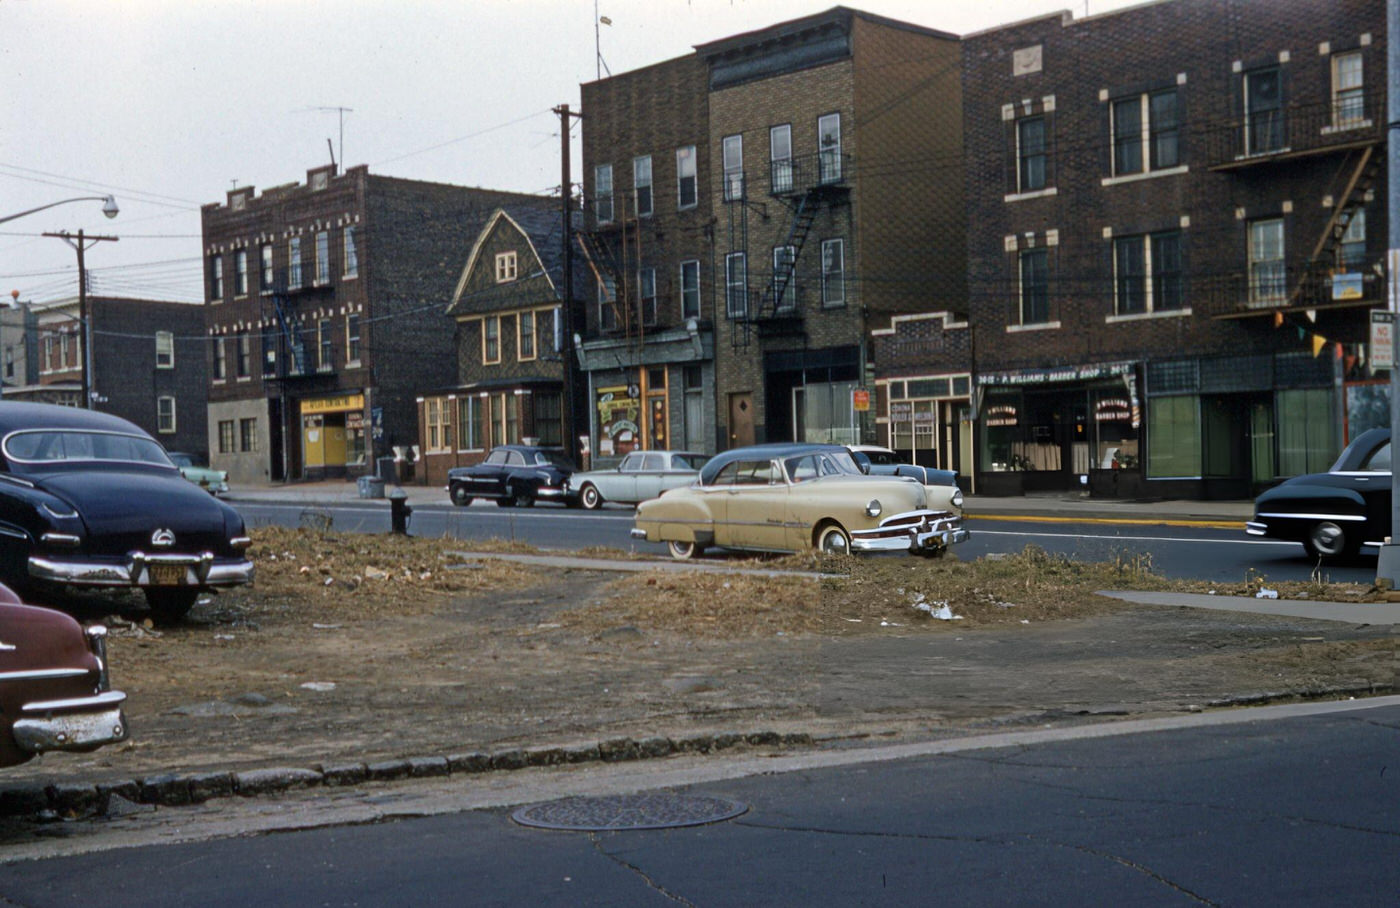 Residential And Commercial Buildings At The Intersection Of 108Th Street And 37Th Avenue, Corona, Queens, 1960.